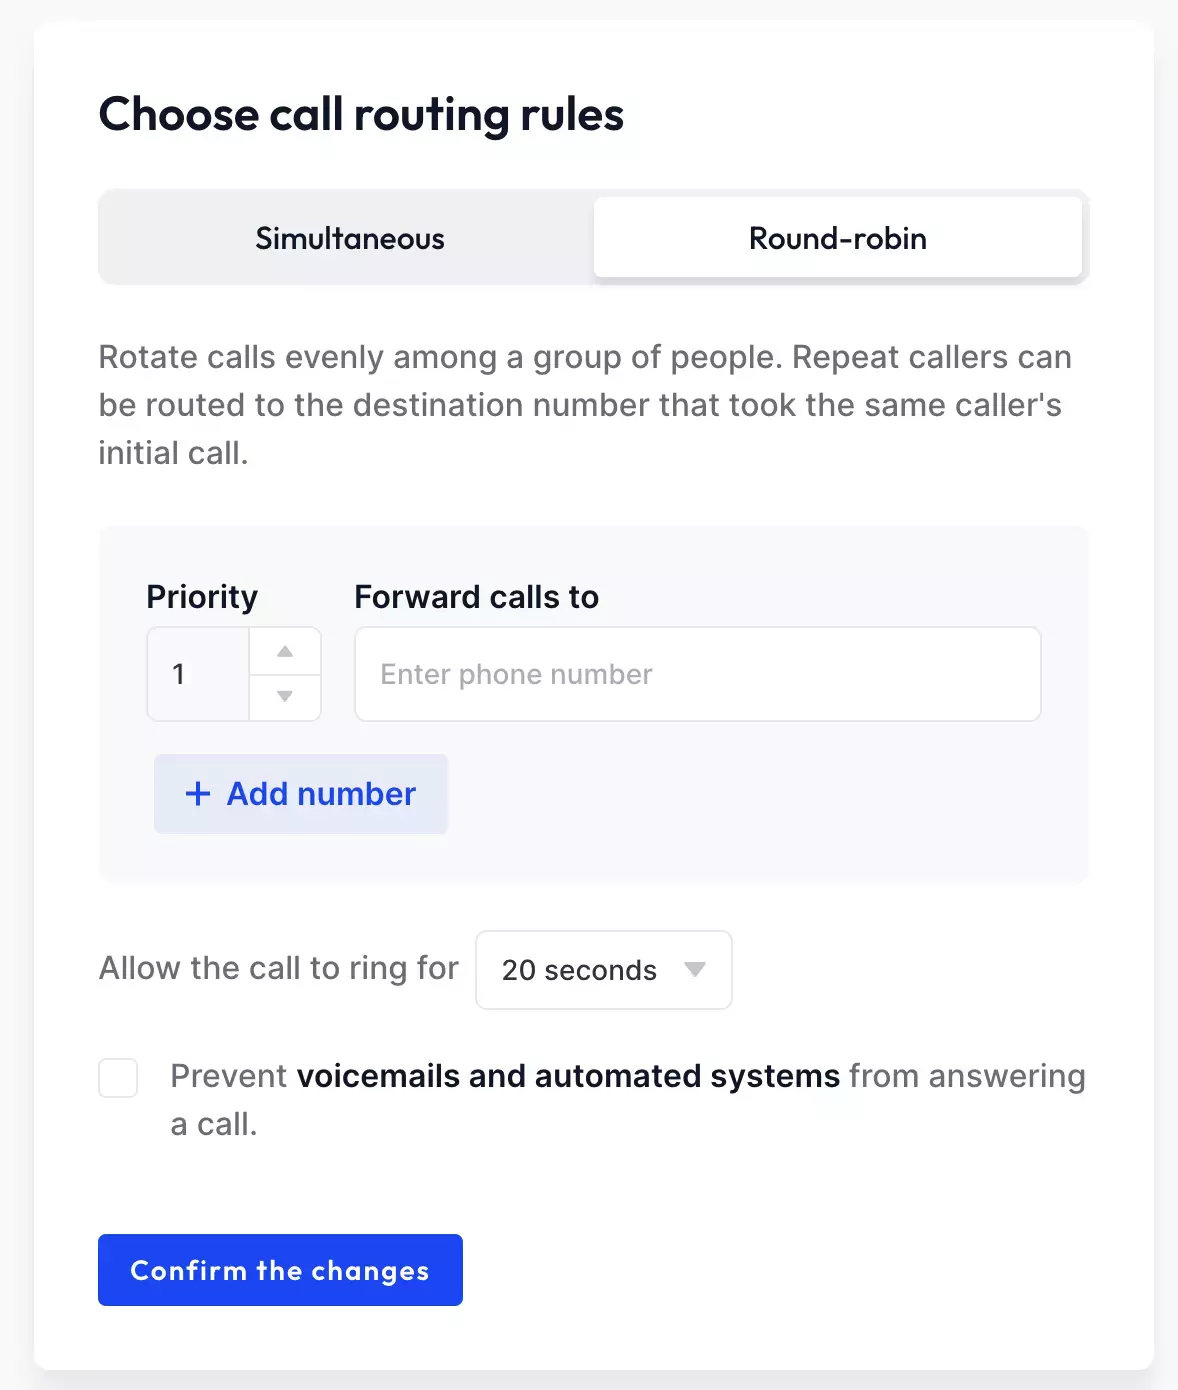 An image of Community Phone business landline round-robin call feature